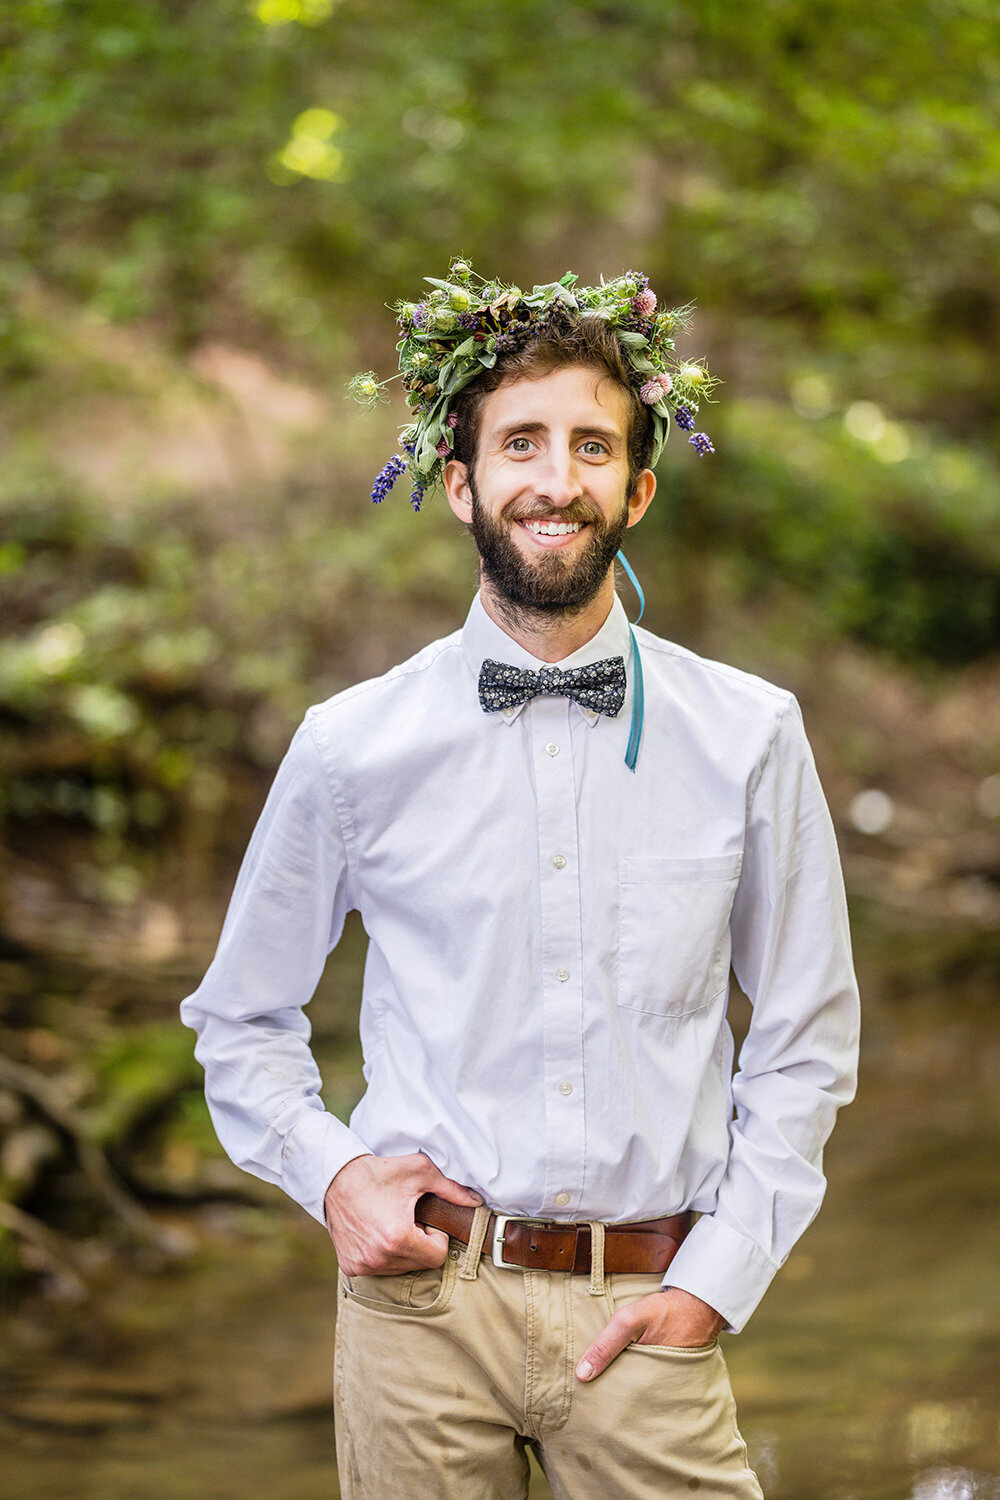 A groom smiles for a formal portrait on his elopement day. He is wearing a flower crown on his head, a simple white button up shirt, a bowtie, khakis, and a brown belt. He has one hand in his pocket while the other holds onto his belt.